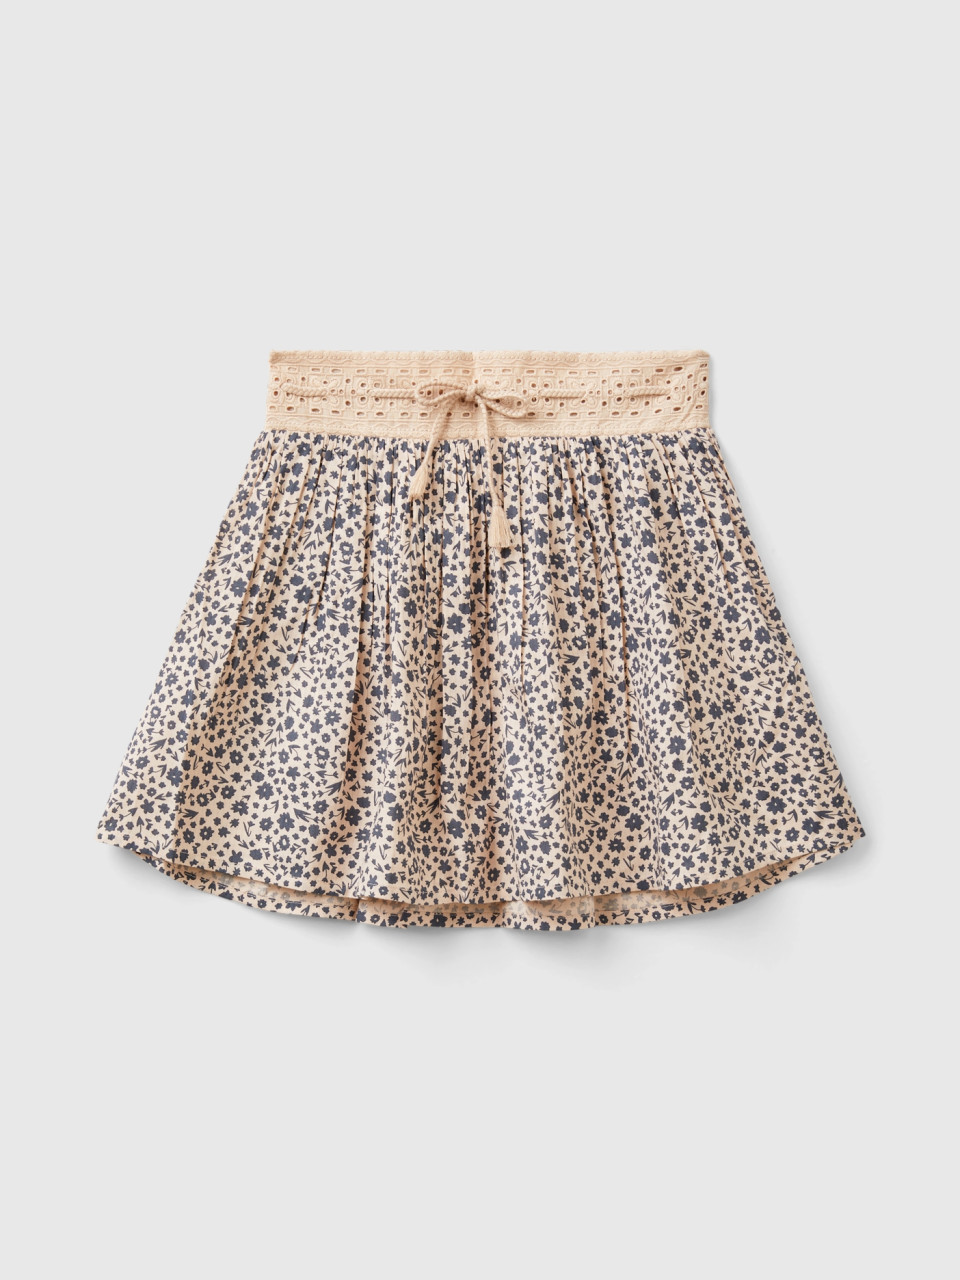 Benetton, Skirt With Floral Print, Soft Pink, Kids